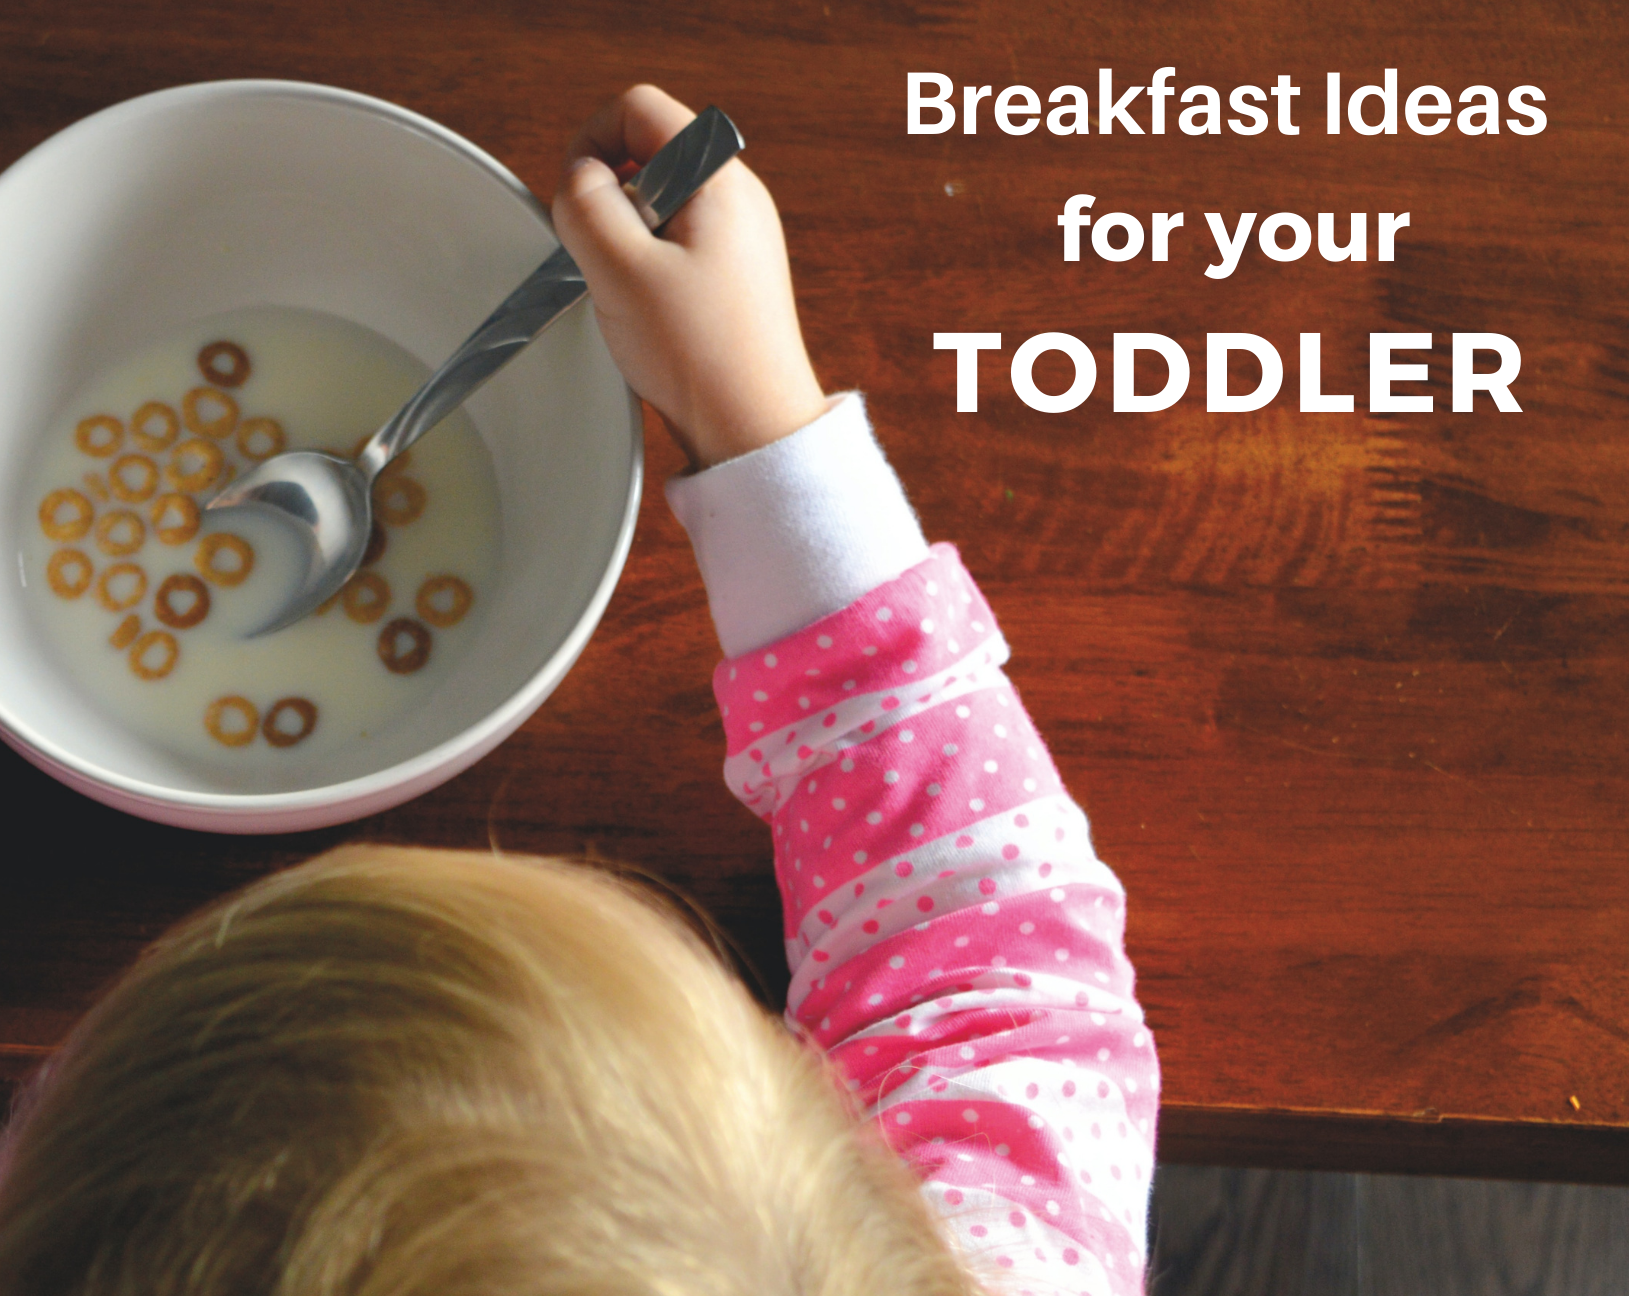 Breakfast Ideas for your Toddler